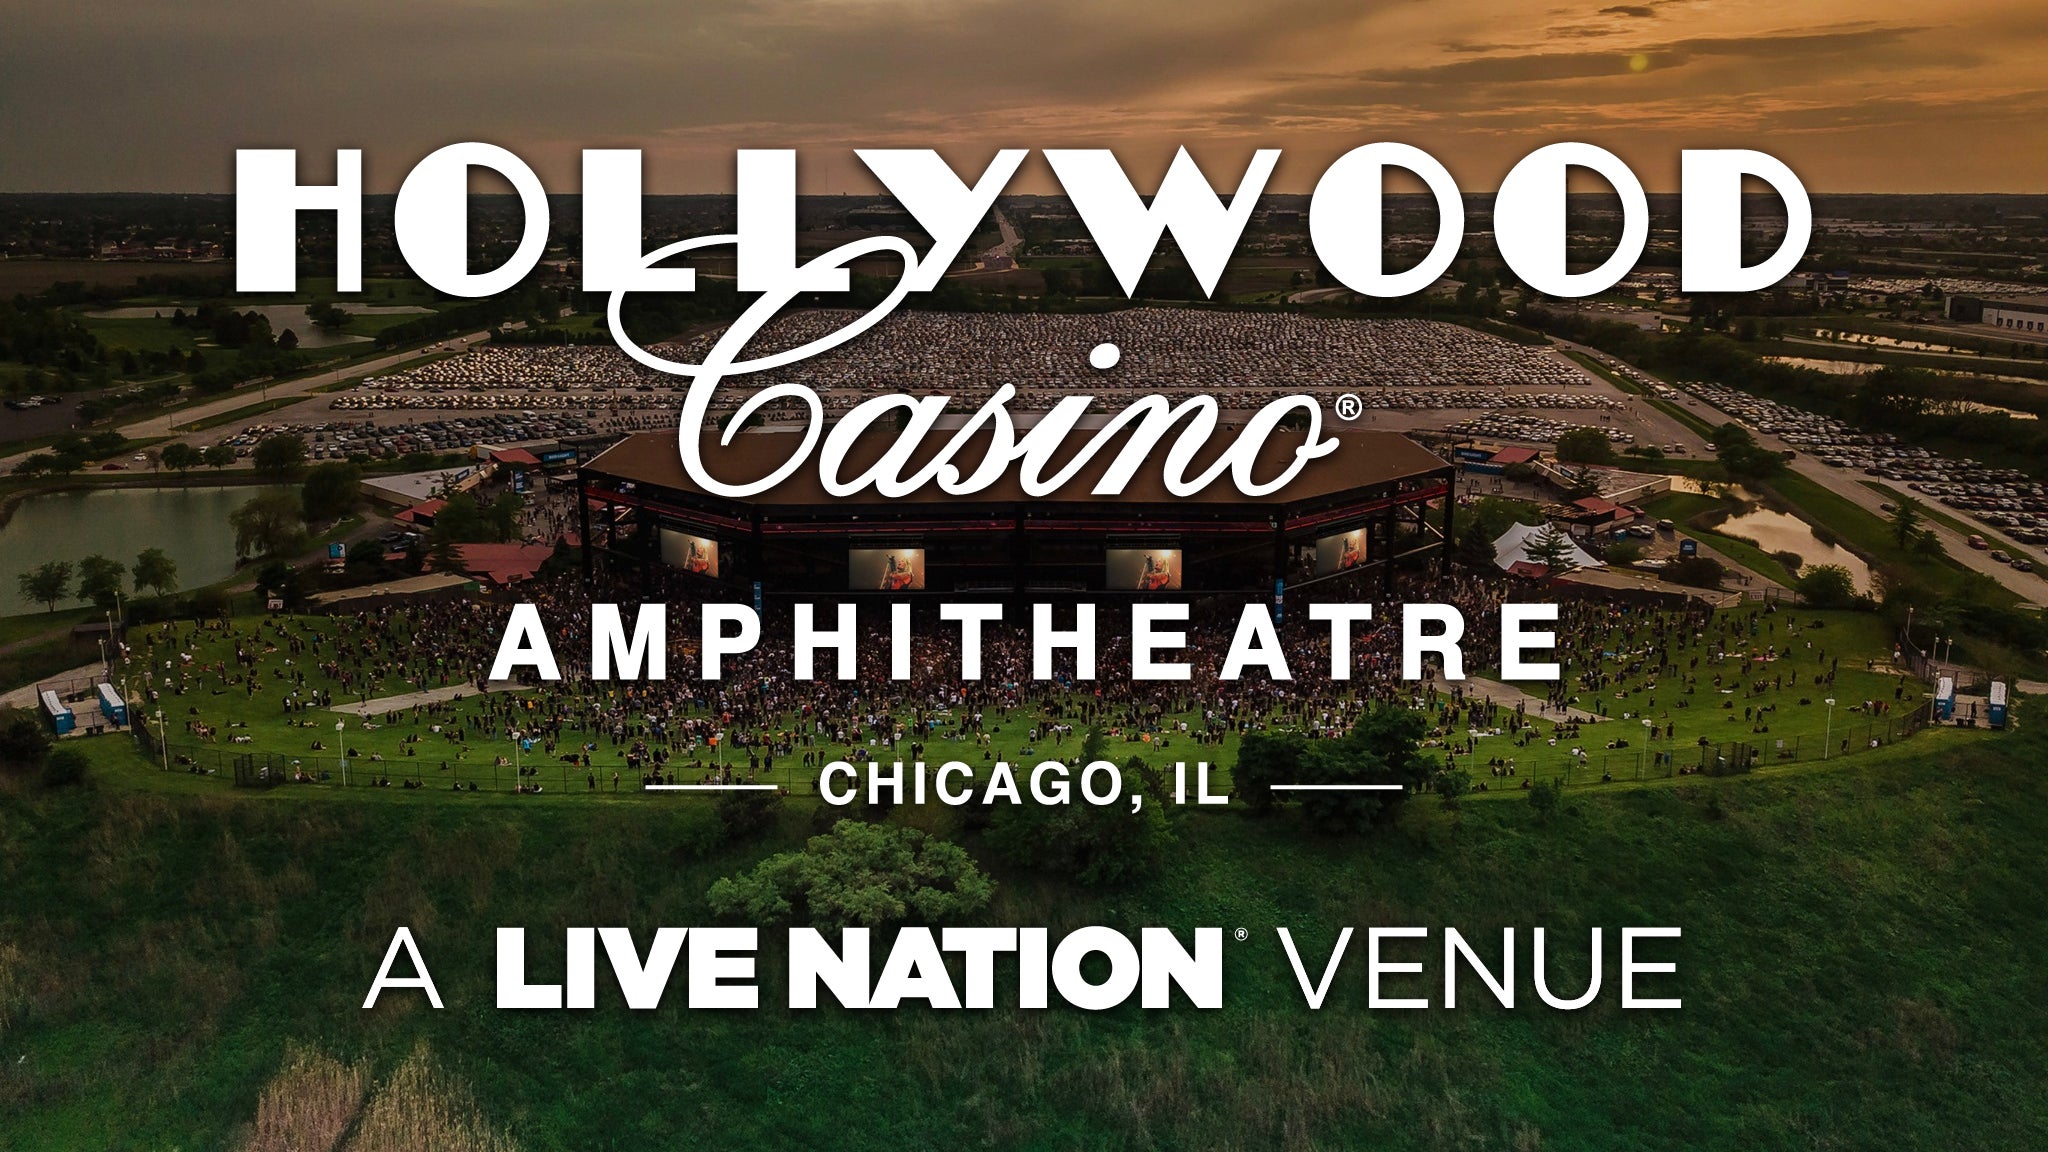 Hollywood casino amphitheatre chicago seating